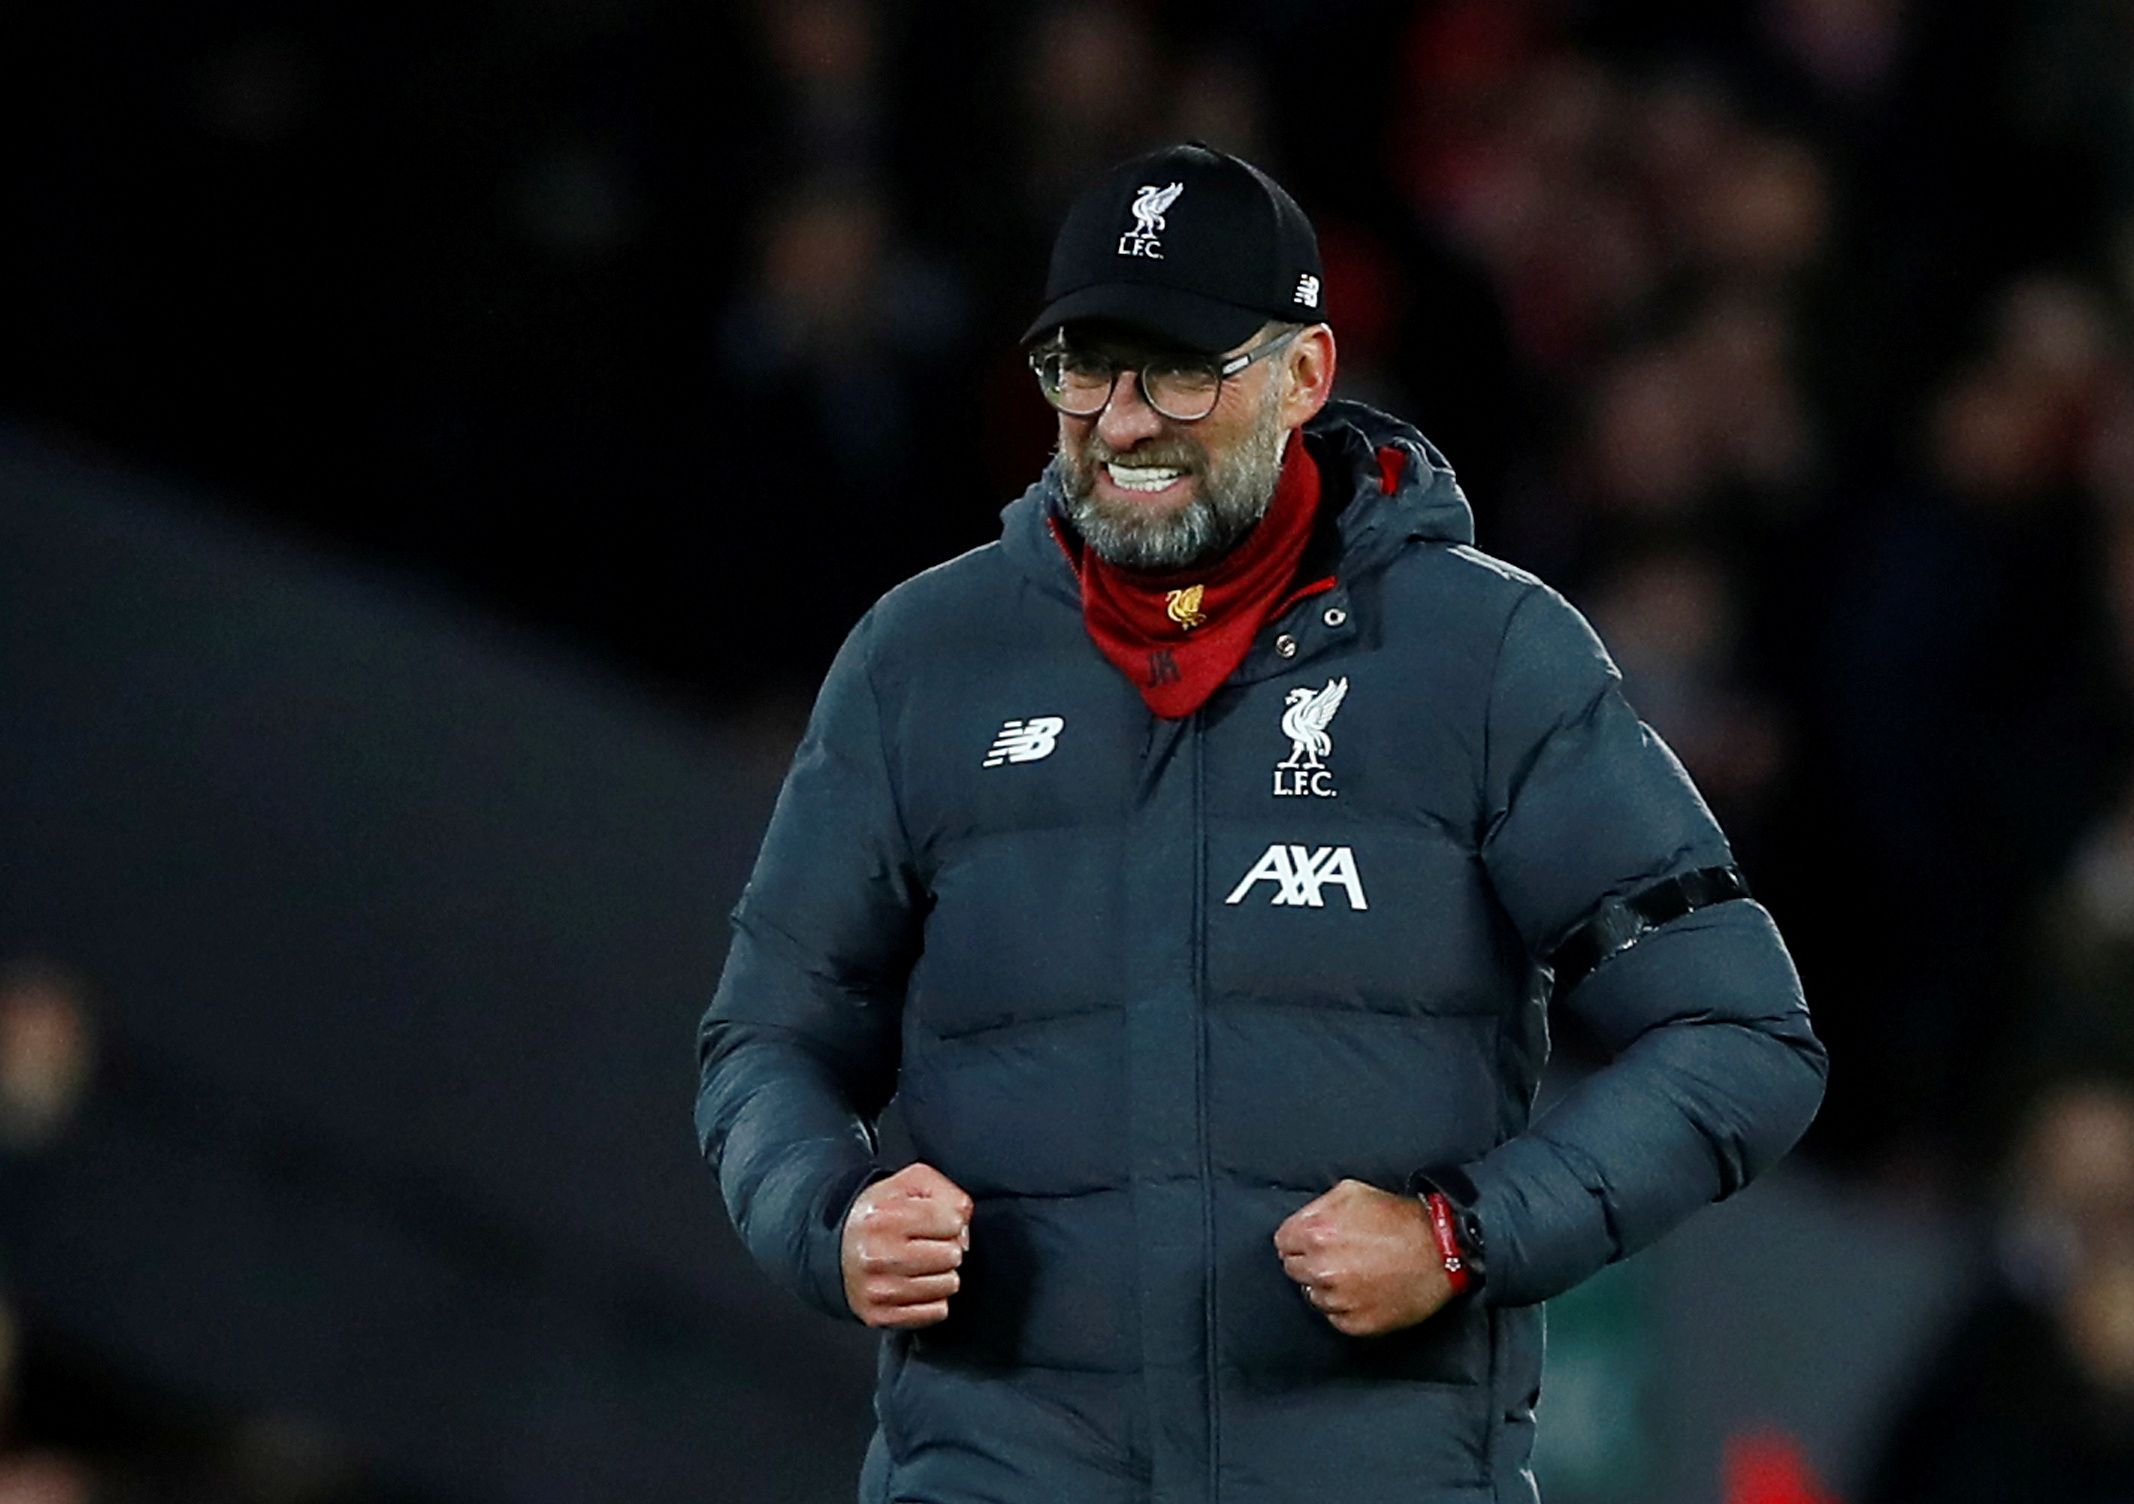 Soccer Football - Premier League - Liverpool v West Ham United - Anfield, Liverpool, Britain - February 24, 2020  Liverpool manager Juergen Klopp celebrates after the match   Action Images via Reuters/Jason Cairnduff  EDITORIAL USE ONLY. No use with unauthorized audio, video, data, fixture lists, club/league logos or 